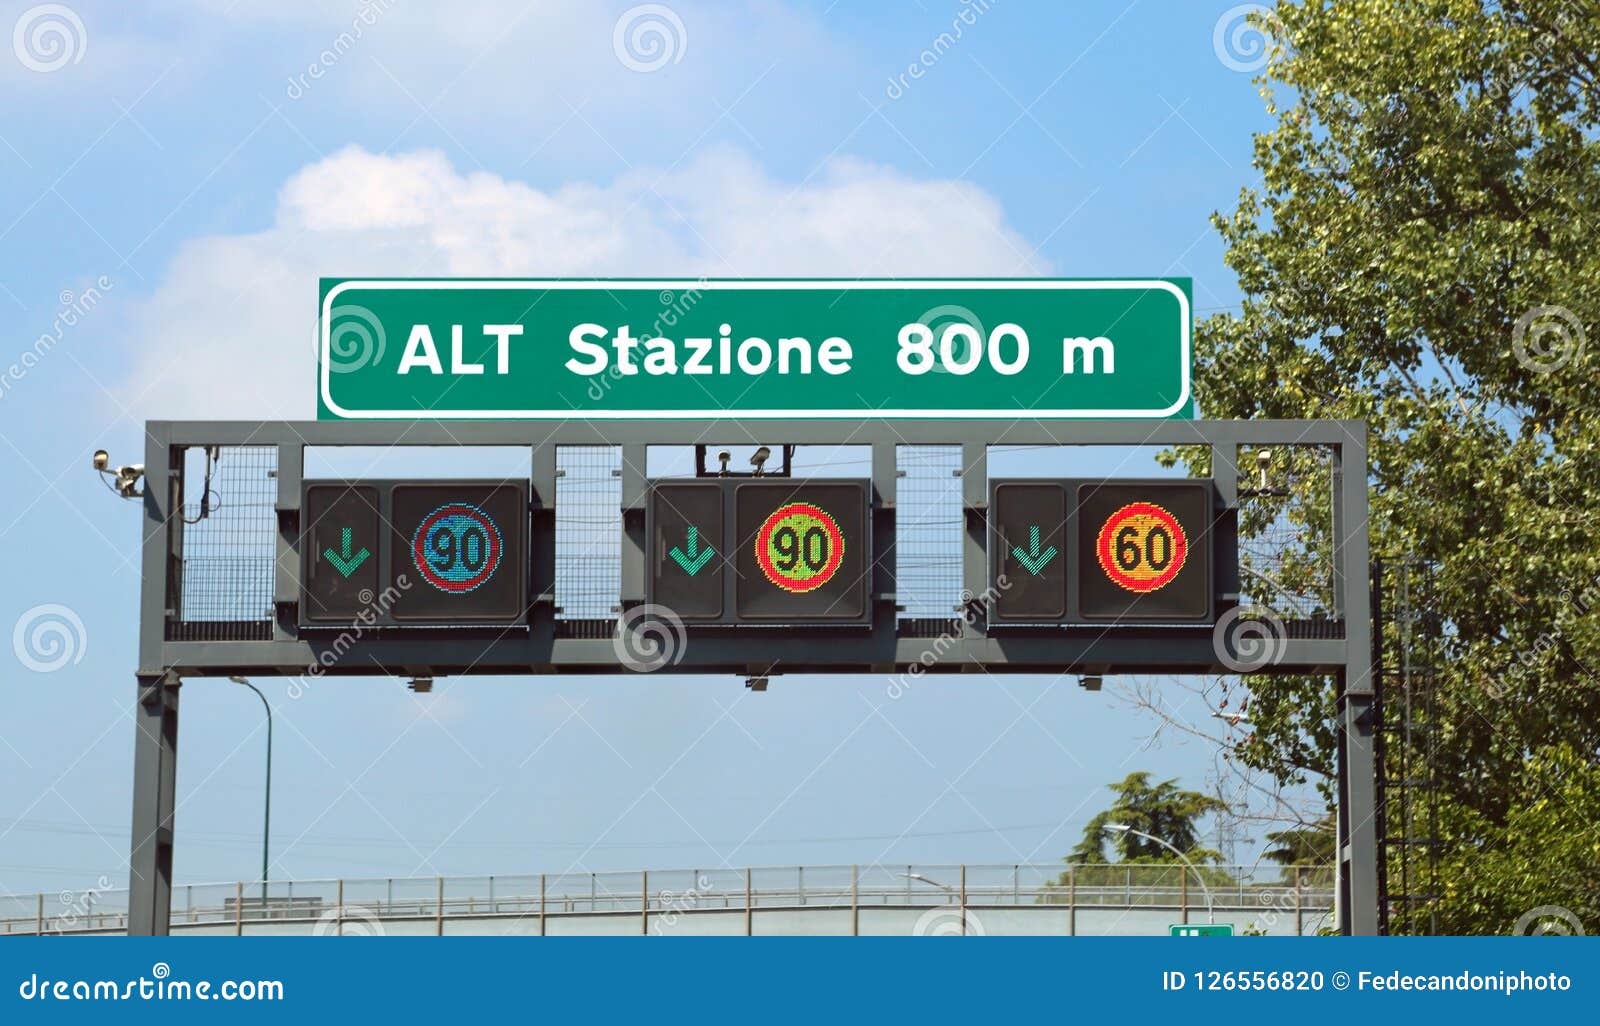 big road signs on the highway the text means stop station at 800